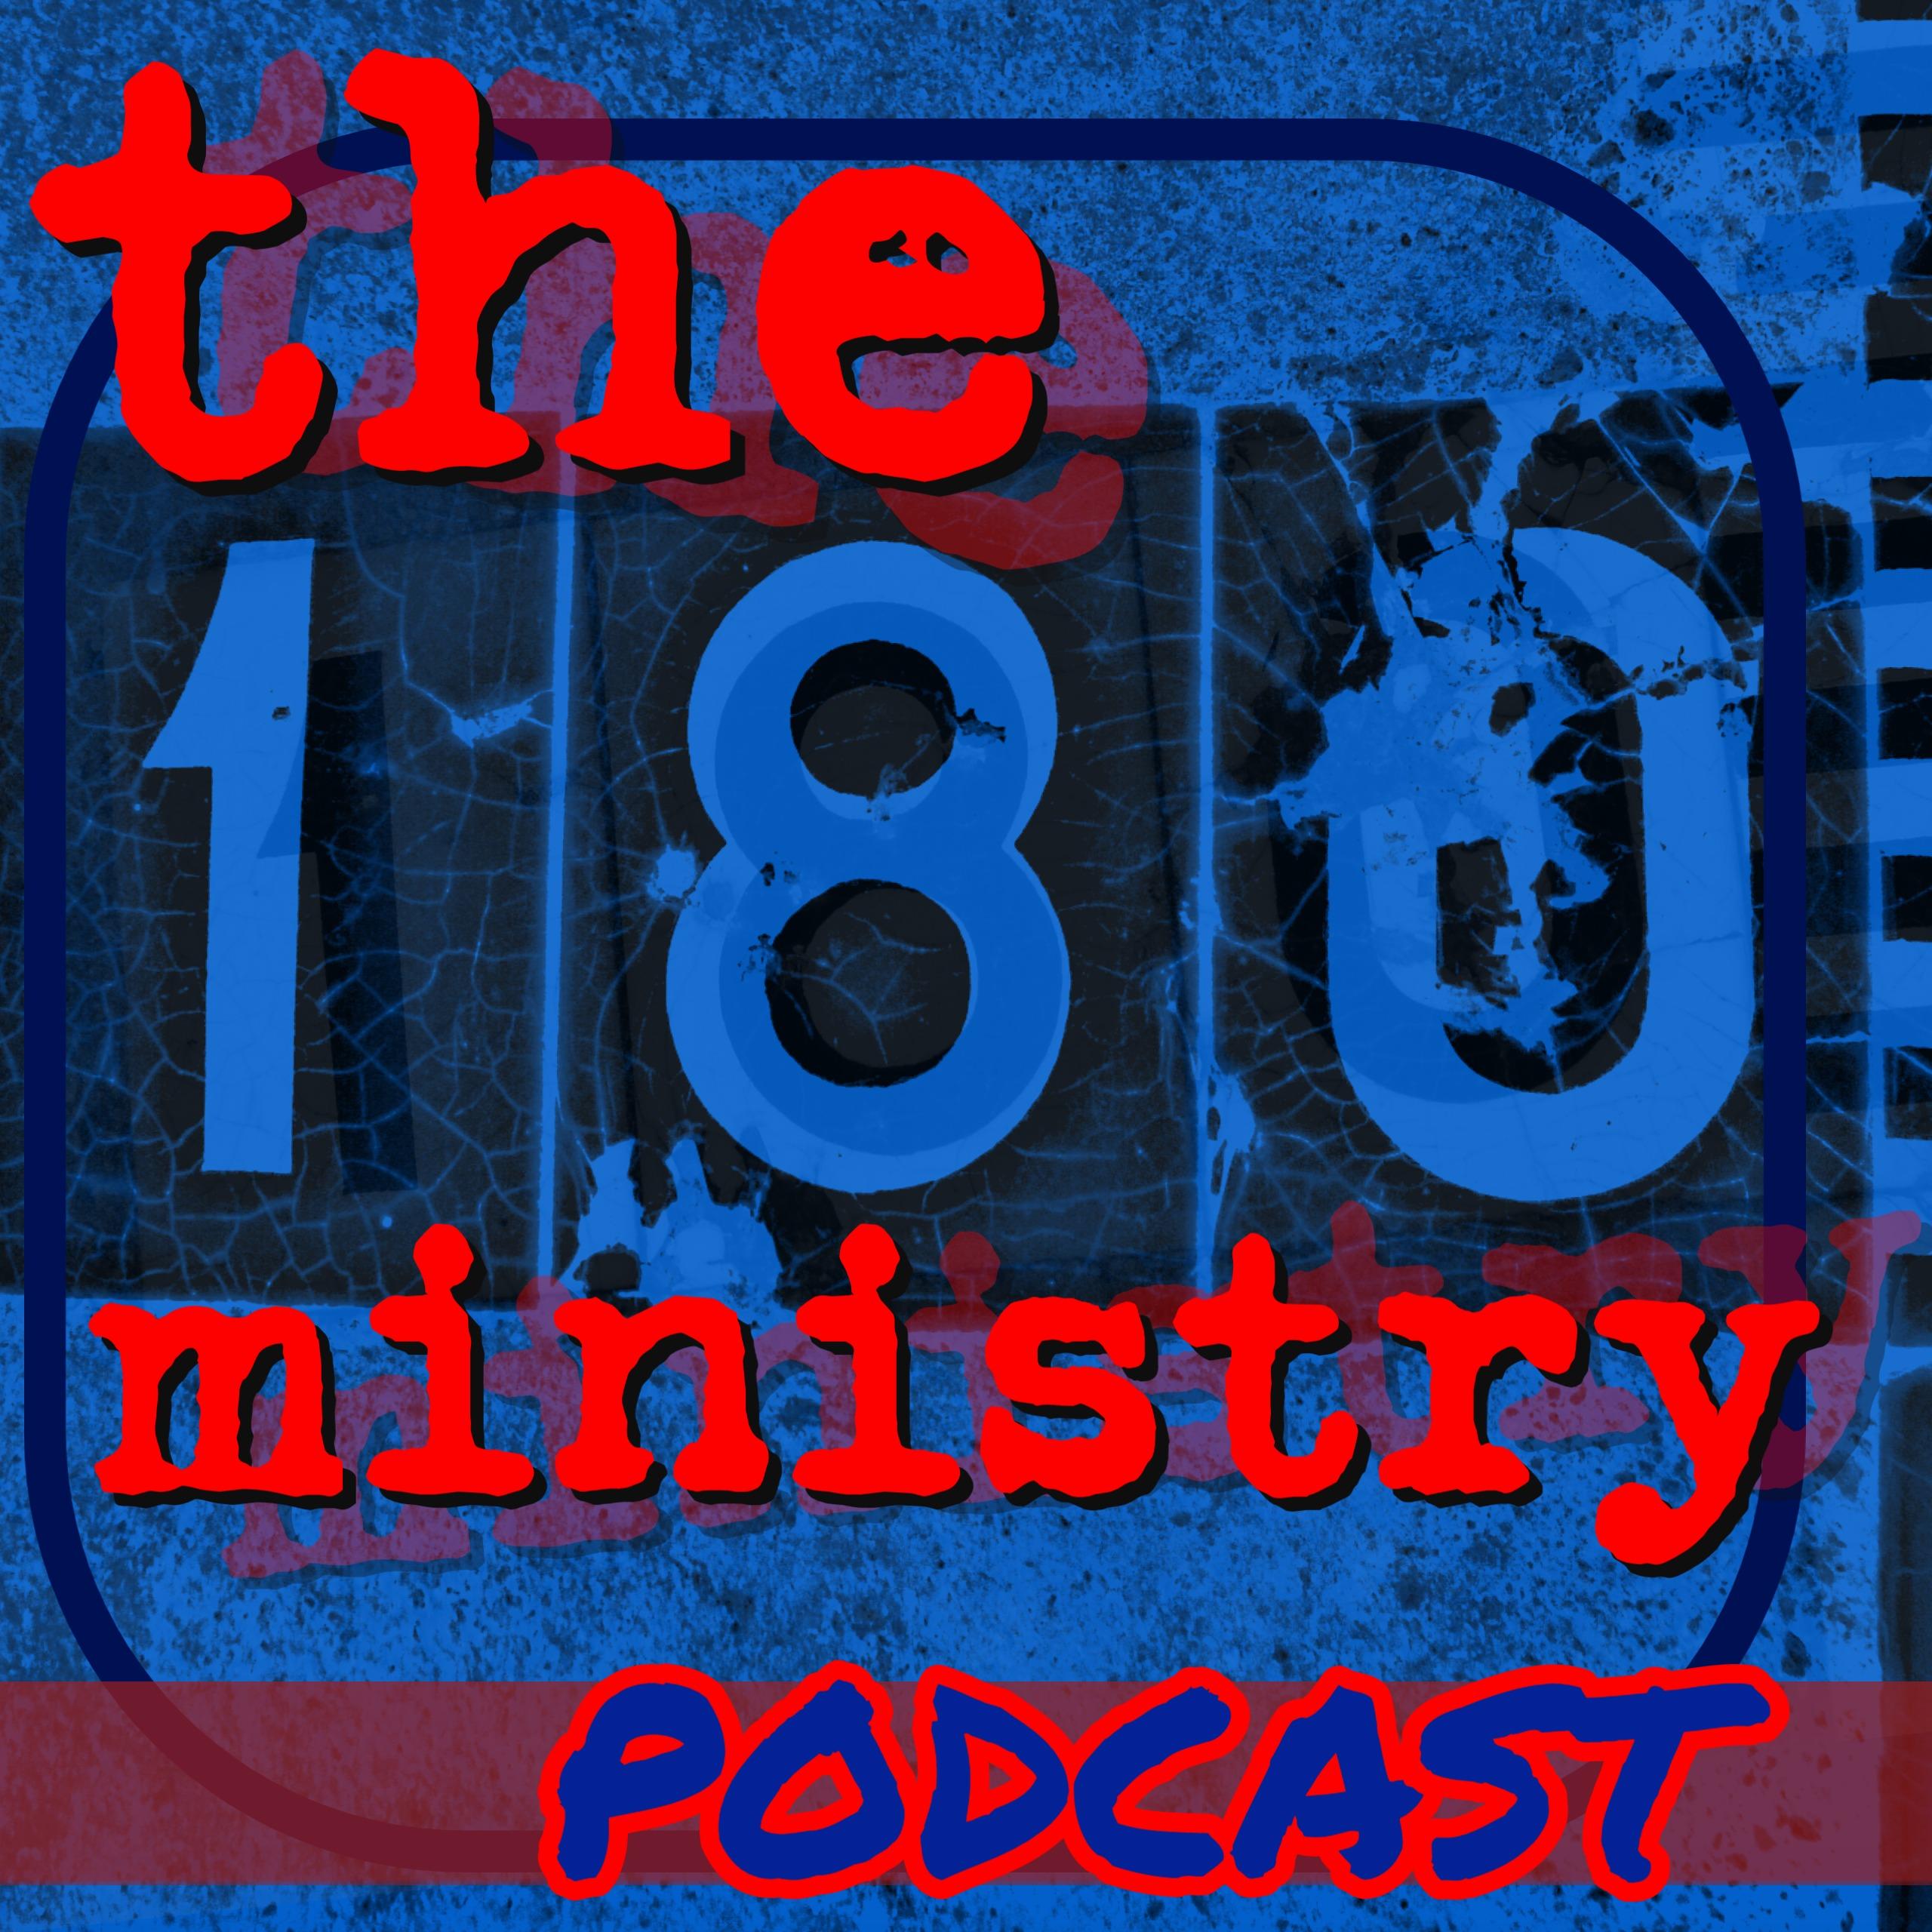 The 180° ministry podcast